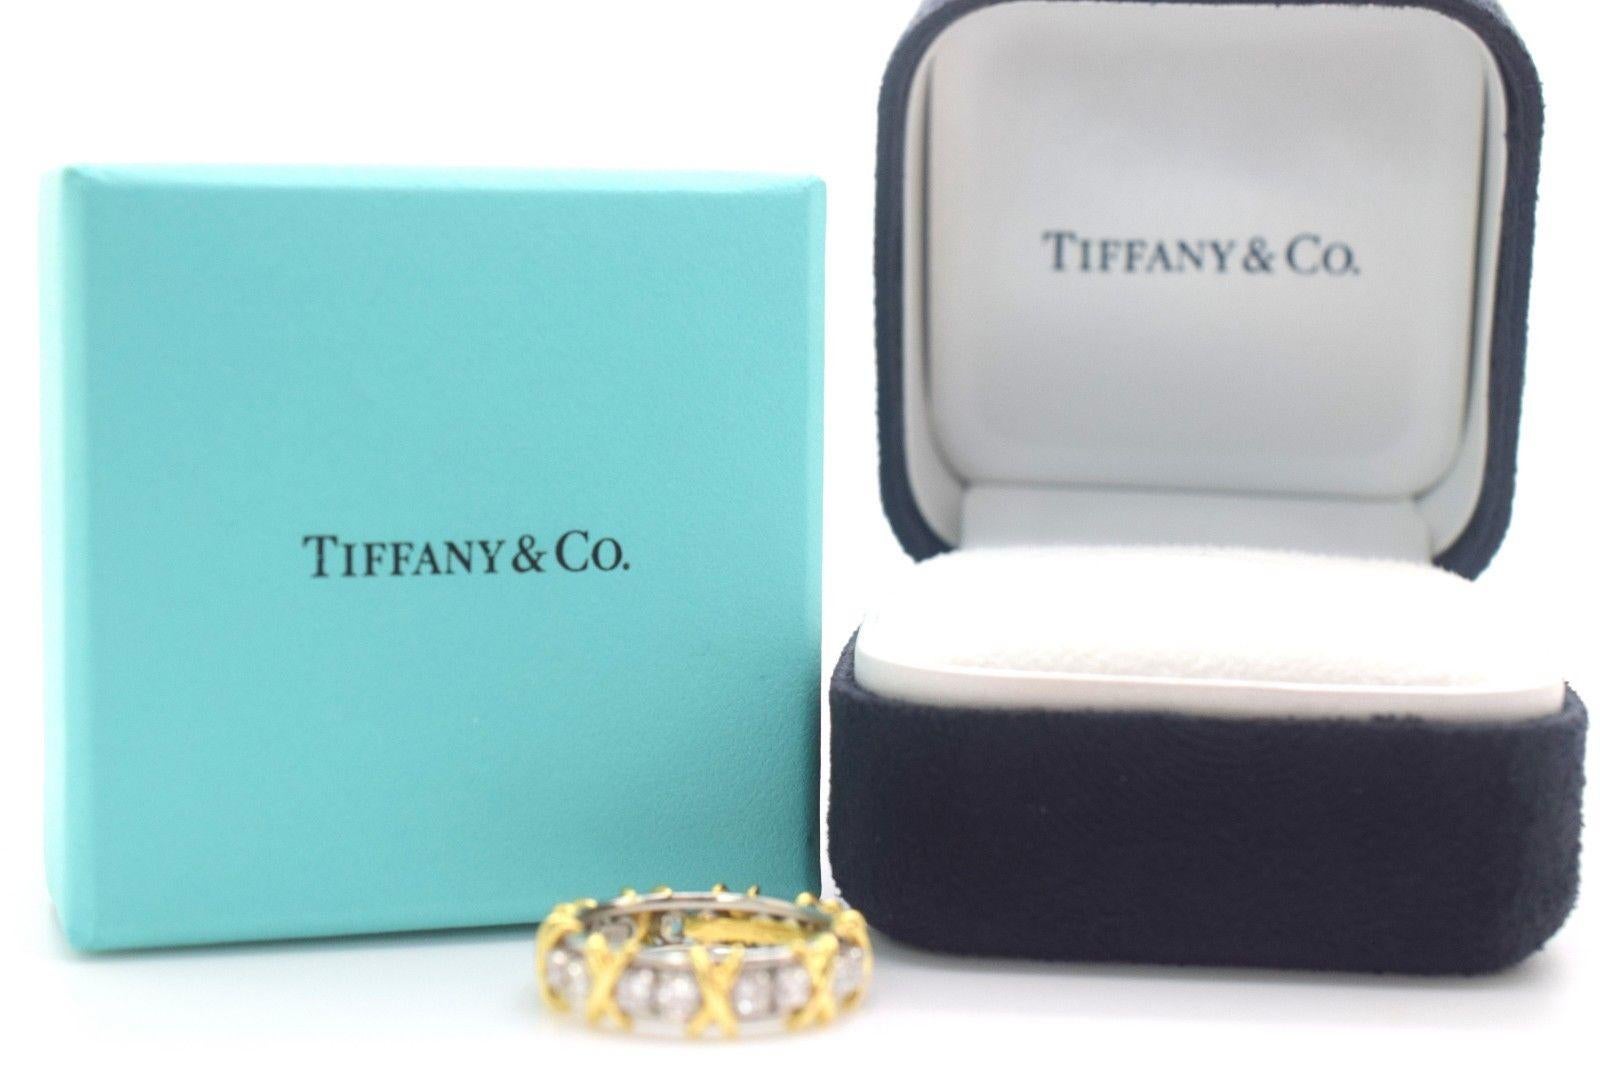 Tiffany & Co. Schlumberger  Studios 16 Stone Ring Diamond in Platinum & Gold Size 5.5. This Tiffany Jean Schlumberger ring is perhaps the designer’s most famous piece,  crafted in platinum and yellow gold with 16 round brilliant diamonds